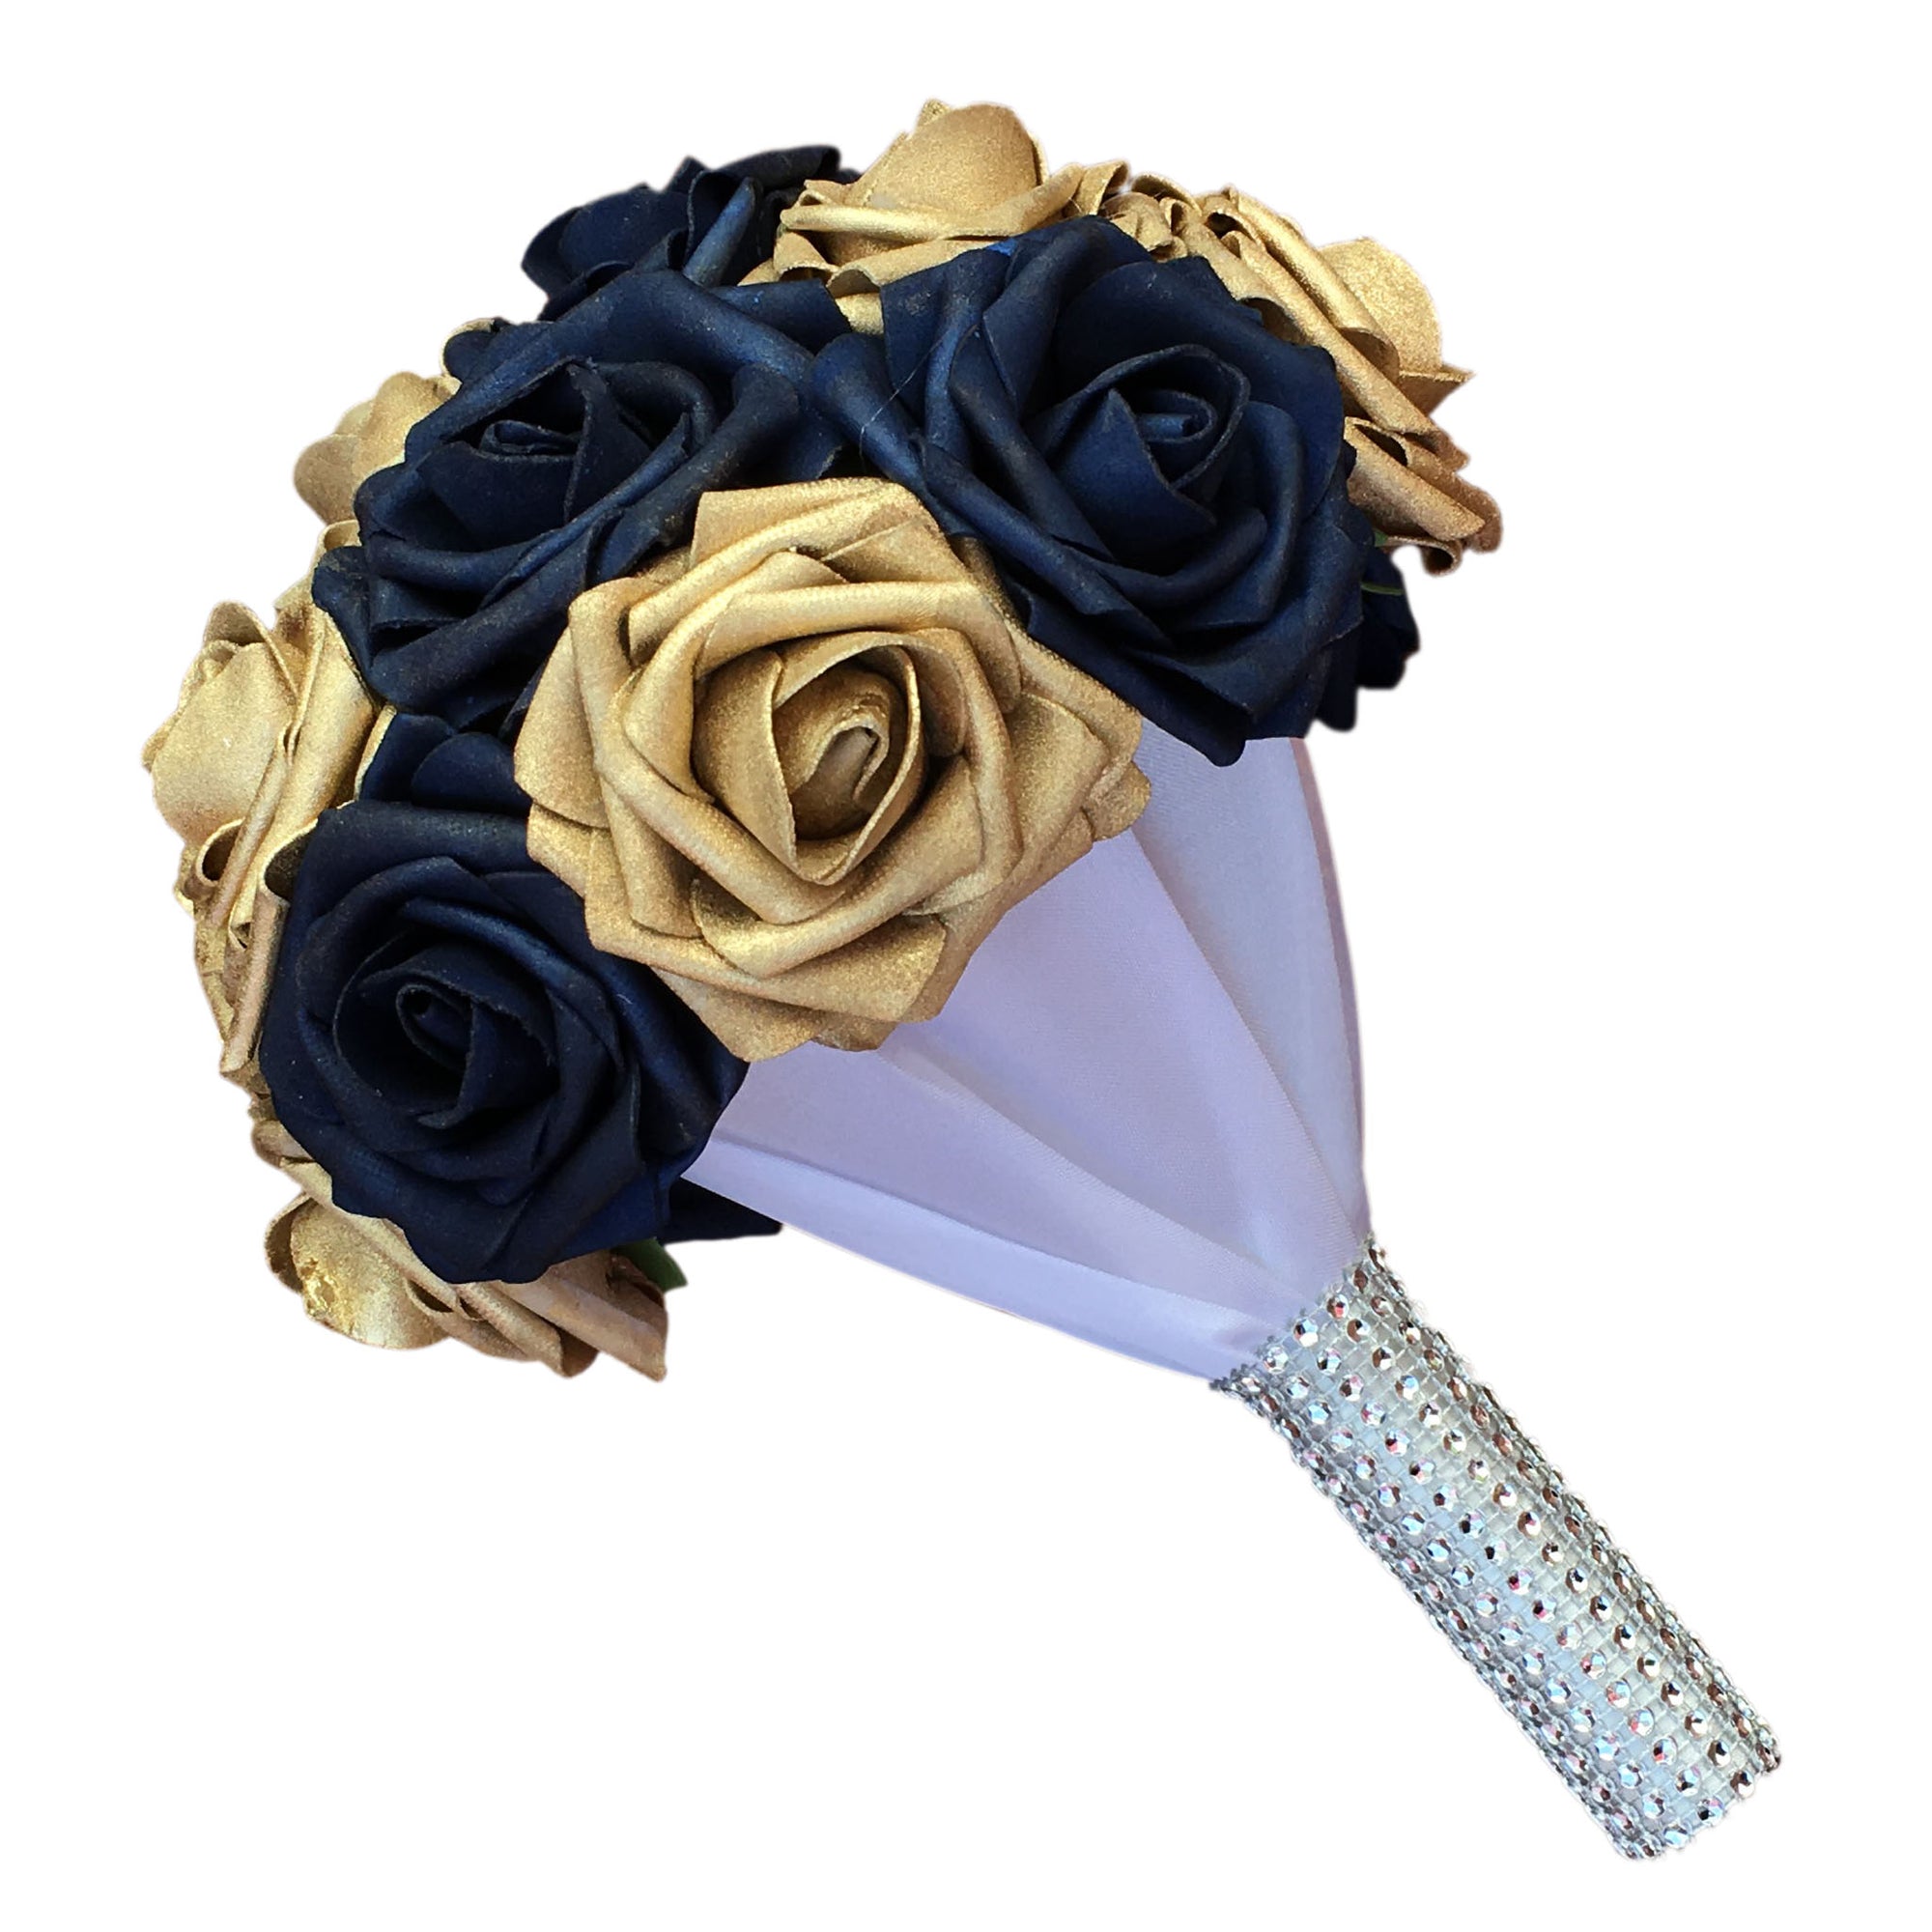 Gold and Navy Blue Bridesmaid Bouquet Fake Rose Wedding Bouquet